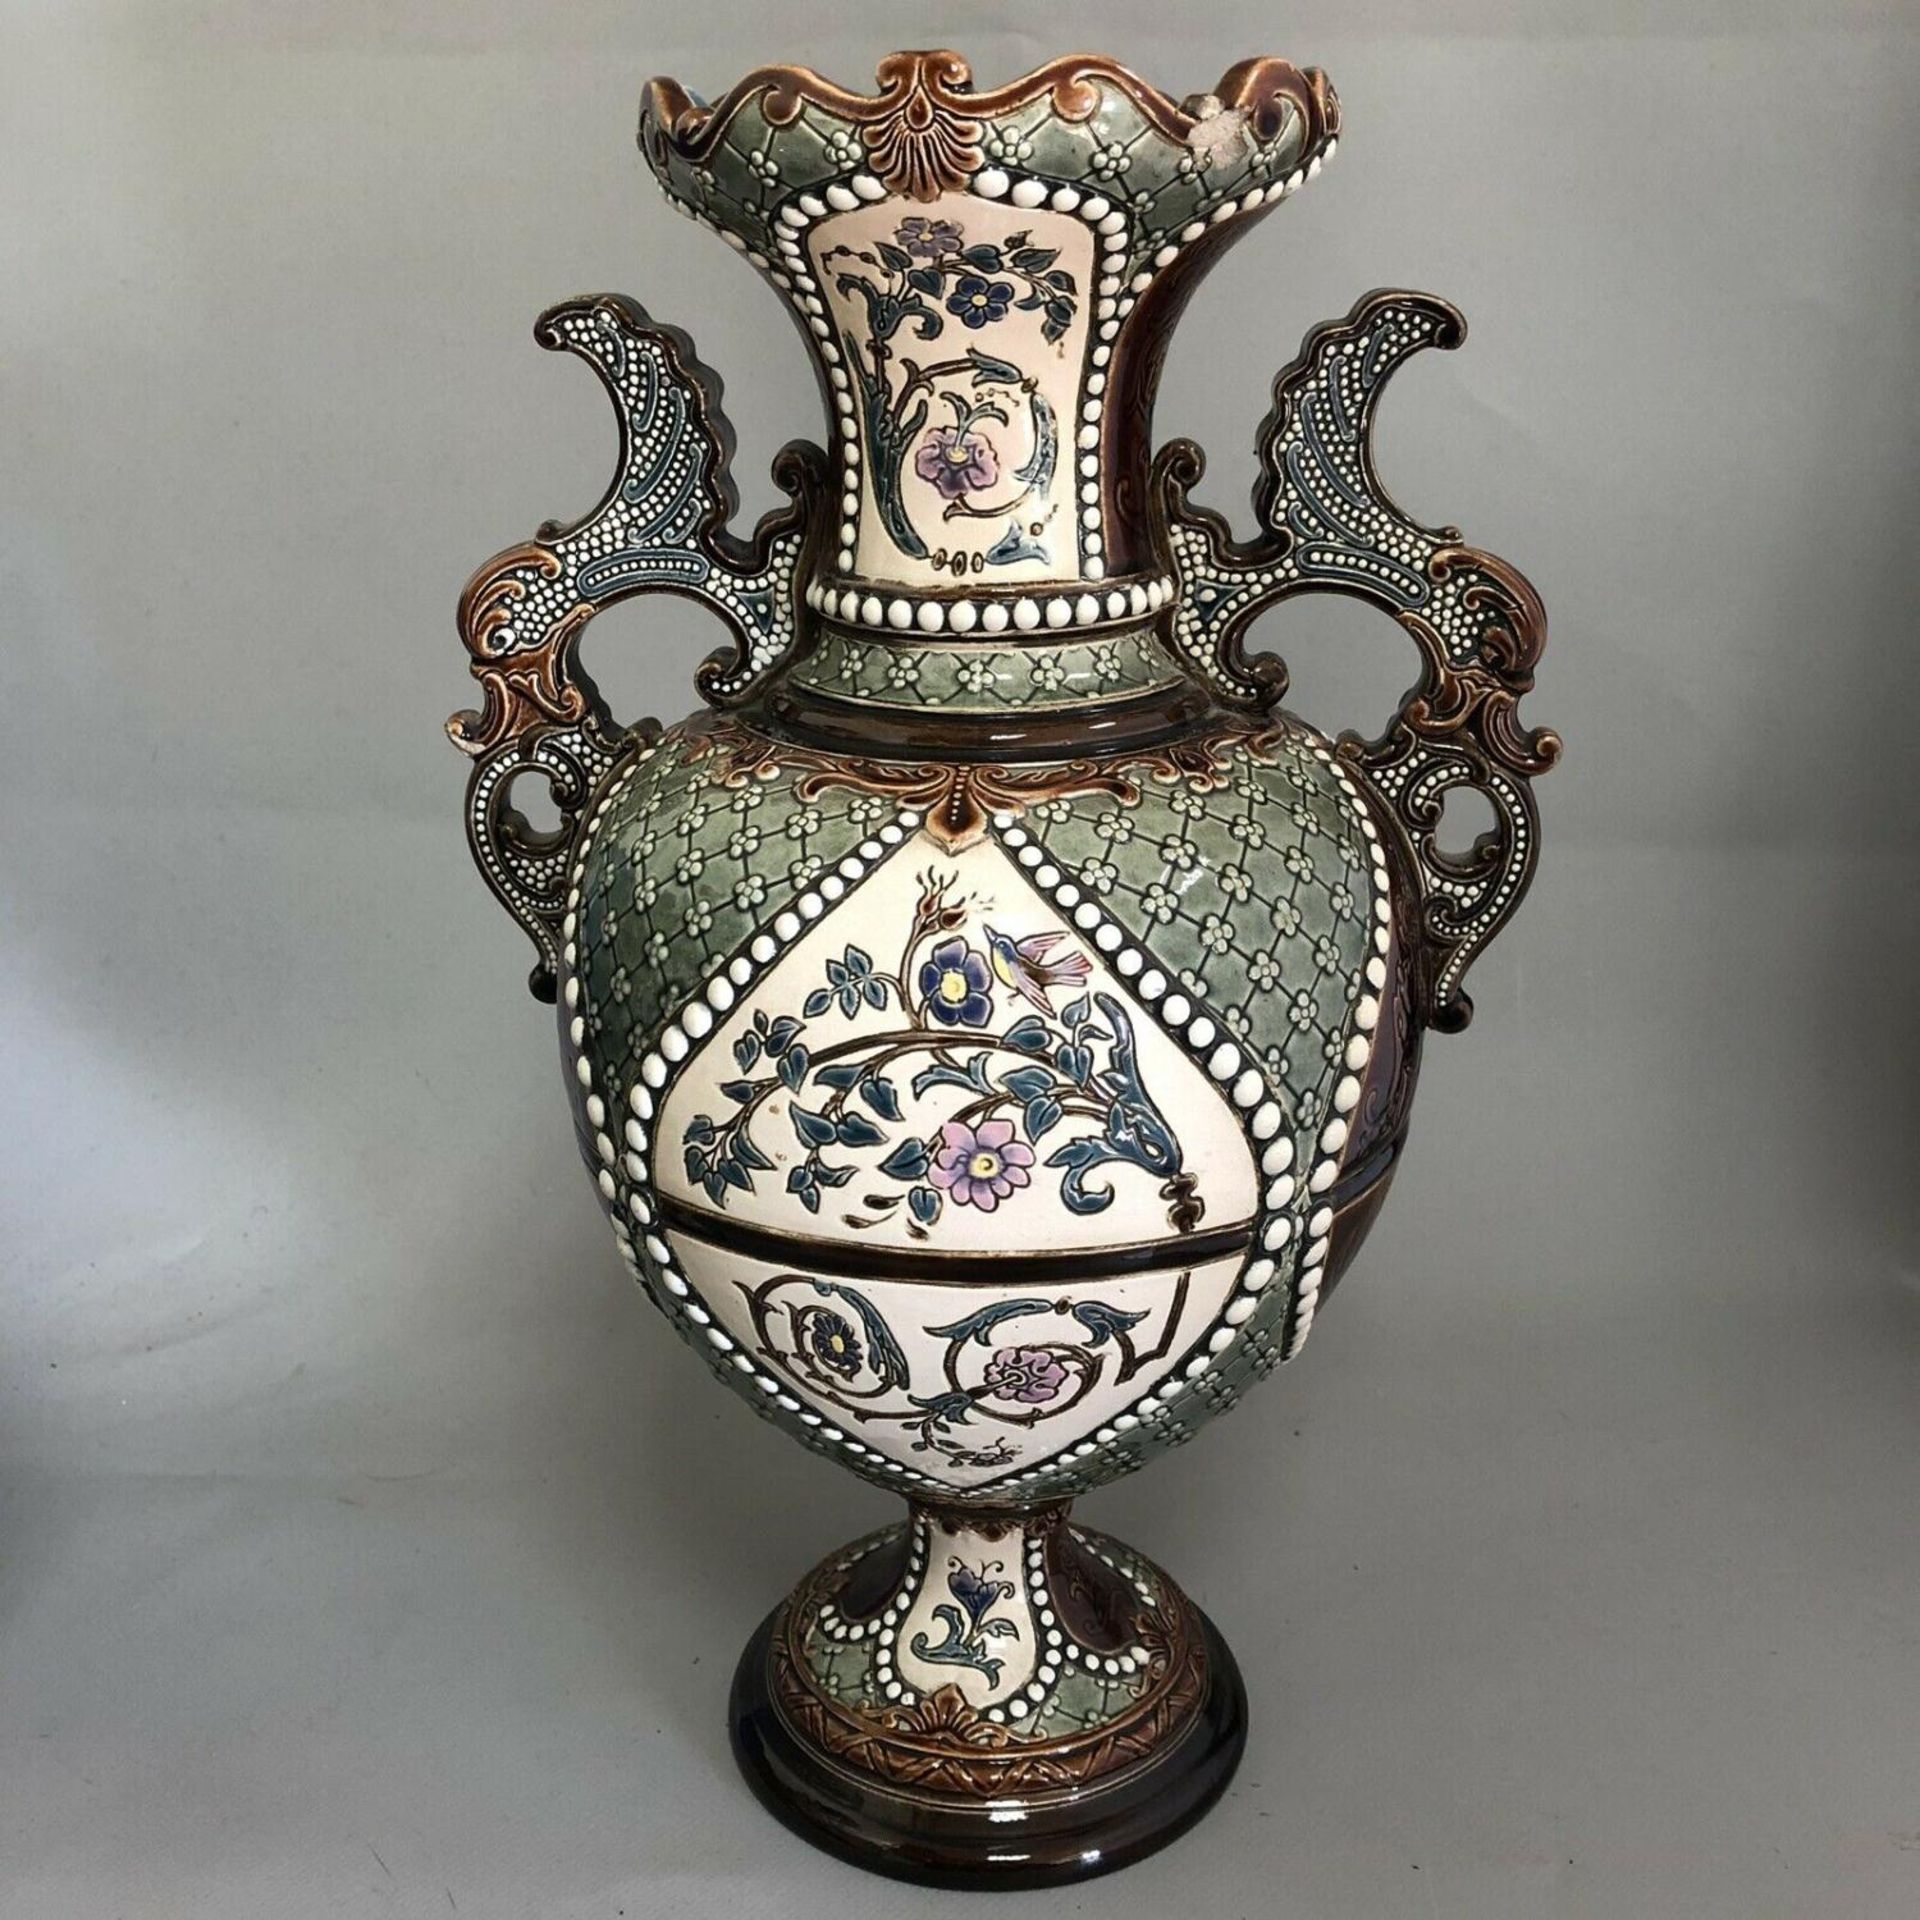 Pair of Antique Austrian Gerbing & Stephan Majolica Pottery Vases c.1880 - Image 2 of 7